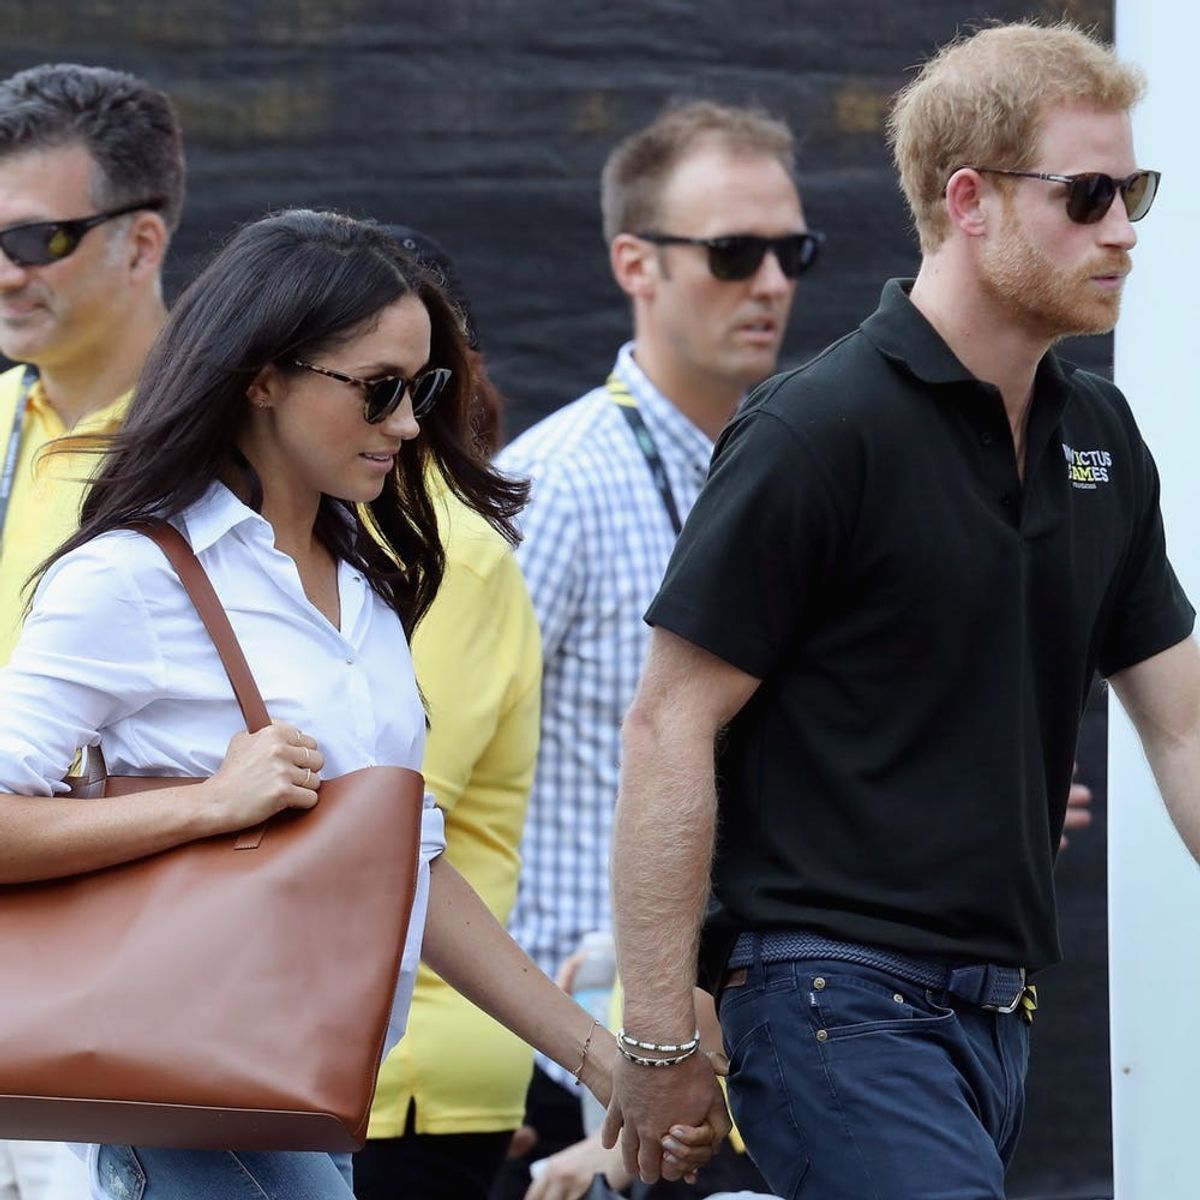 Prince Harry and Meghan Markle Hold Hands at First Official Public Appearance Together